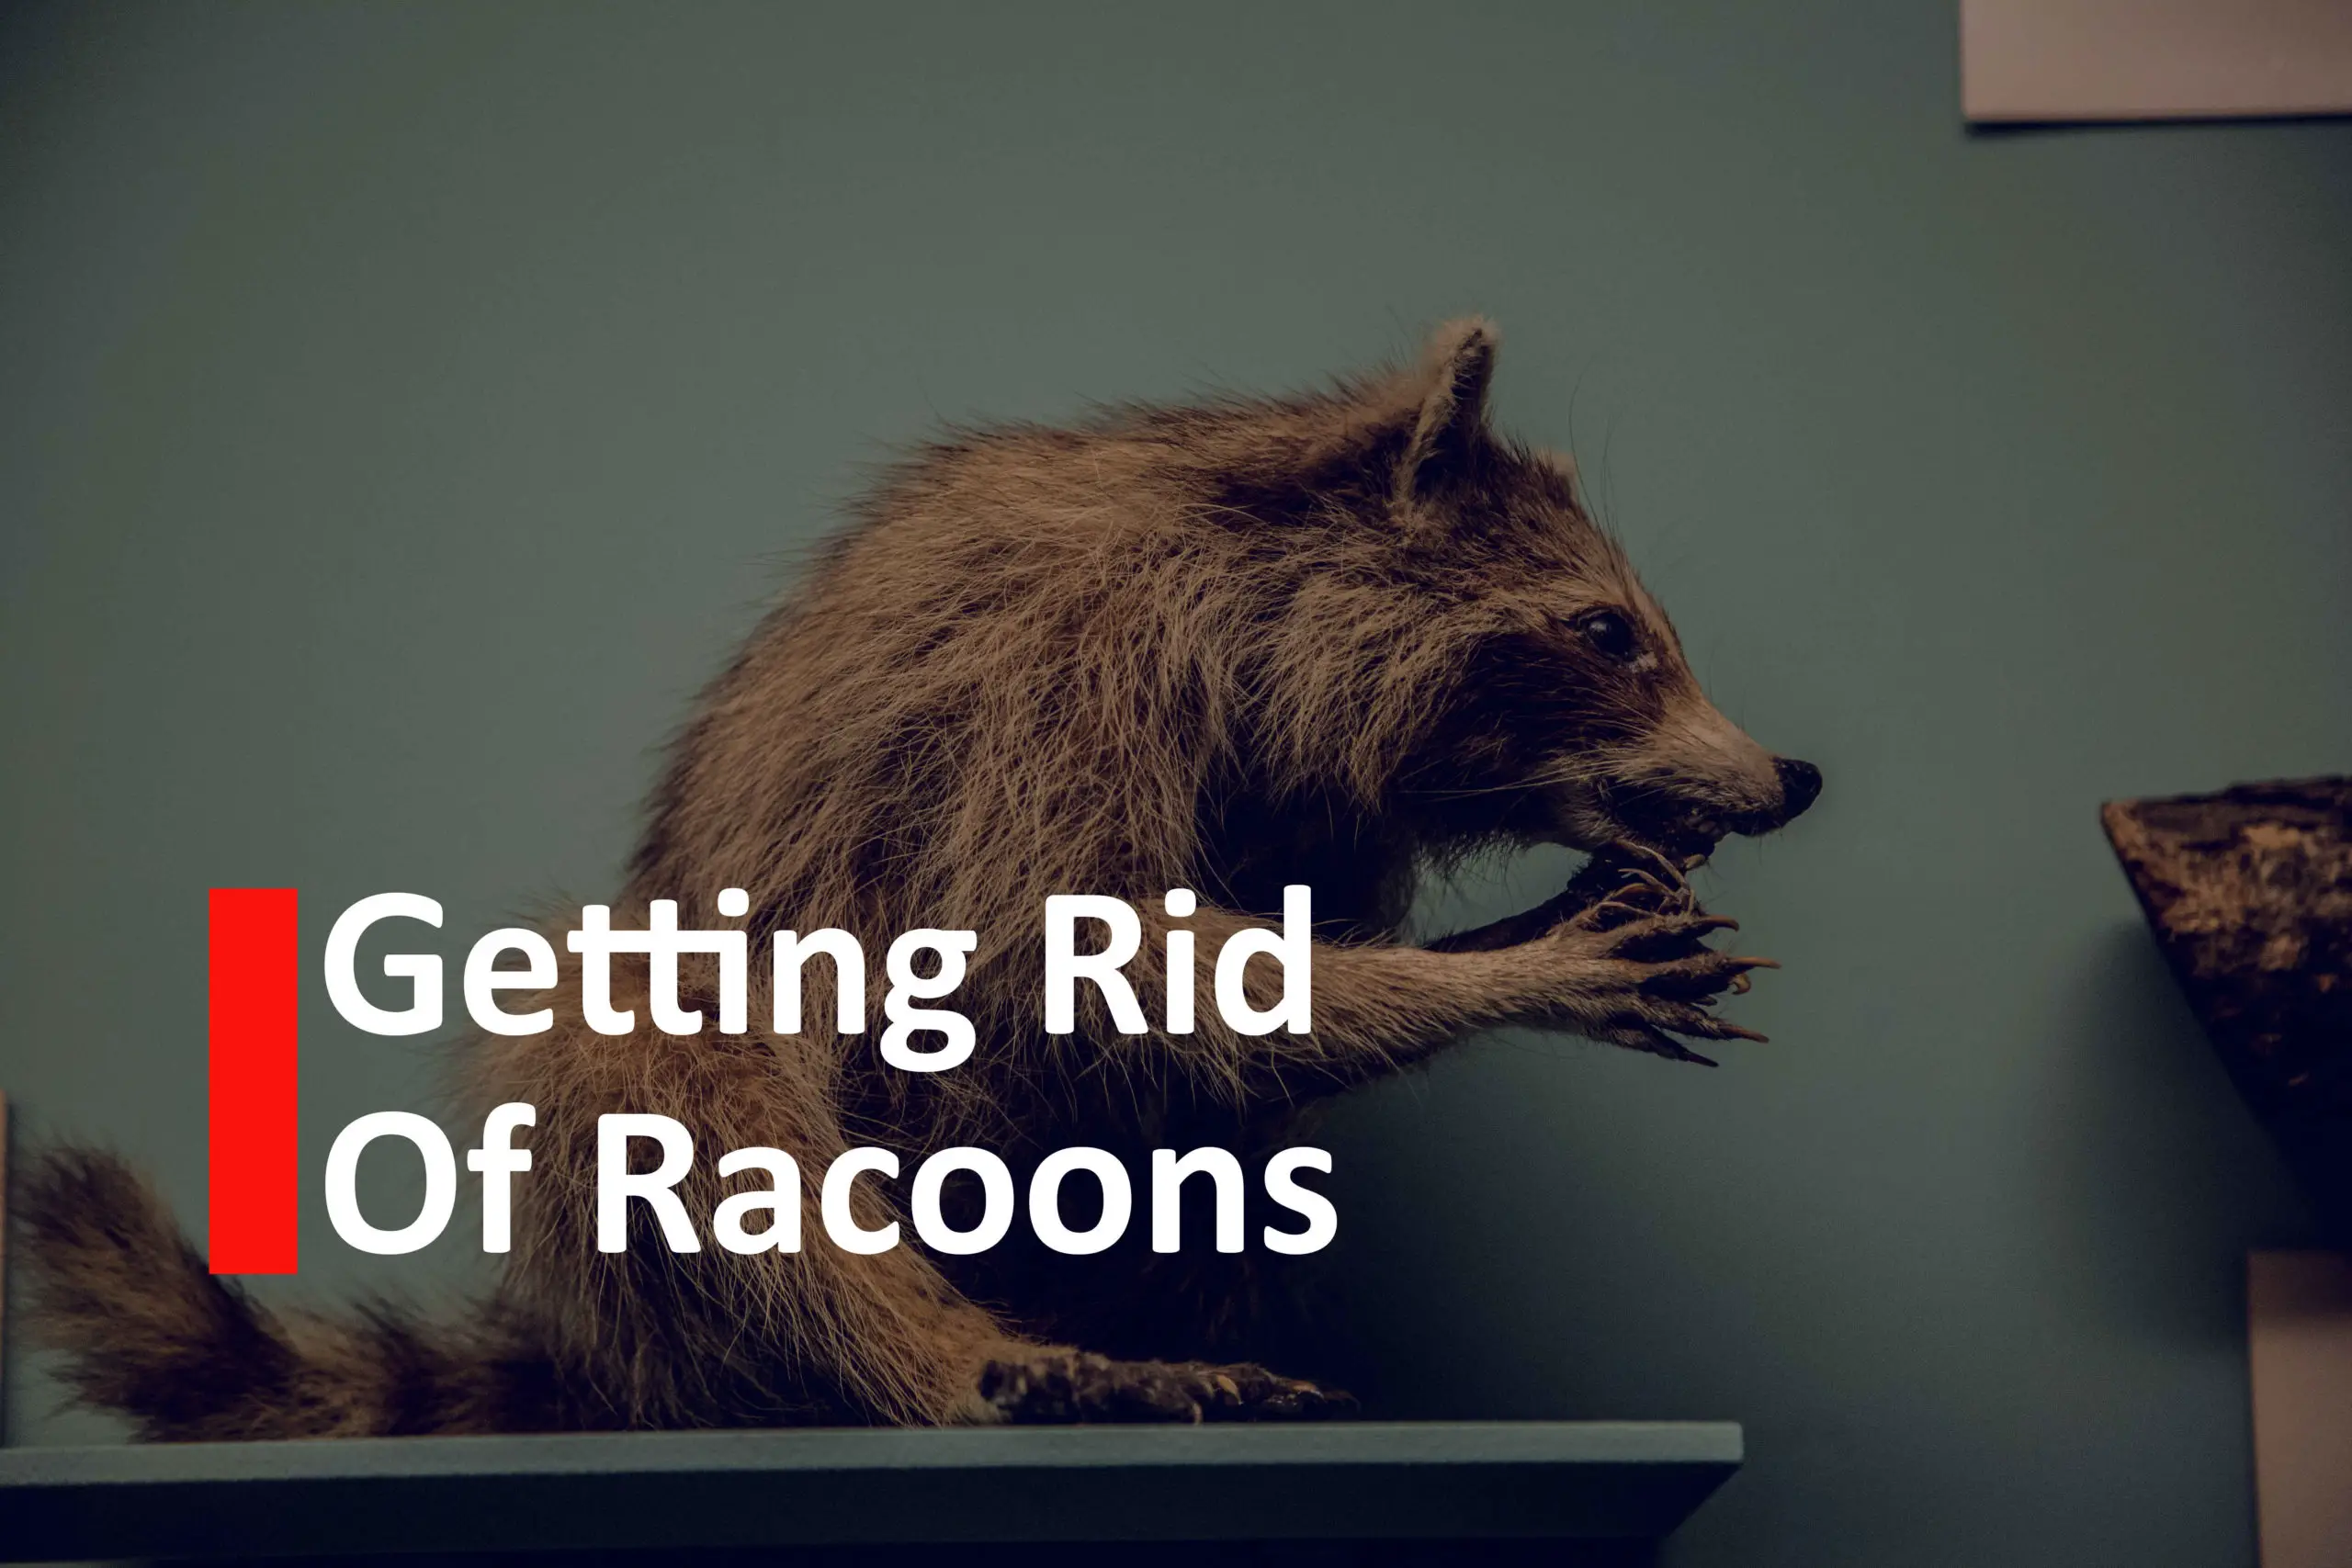 Getting Rid of Racoons